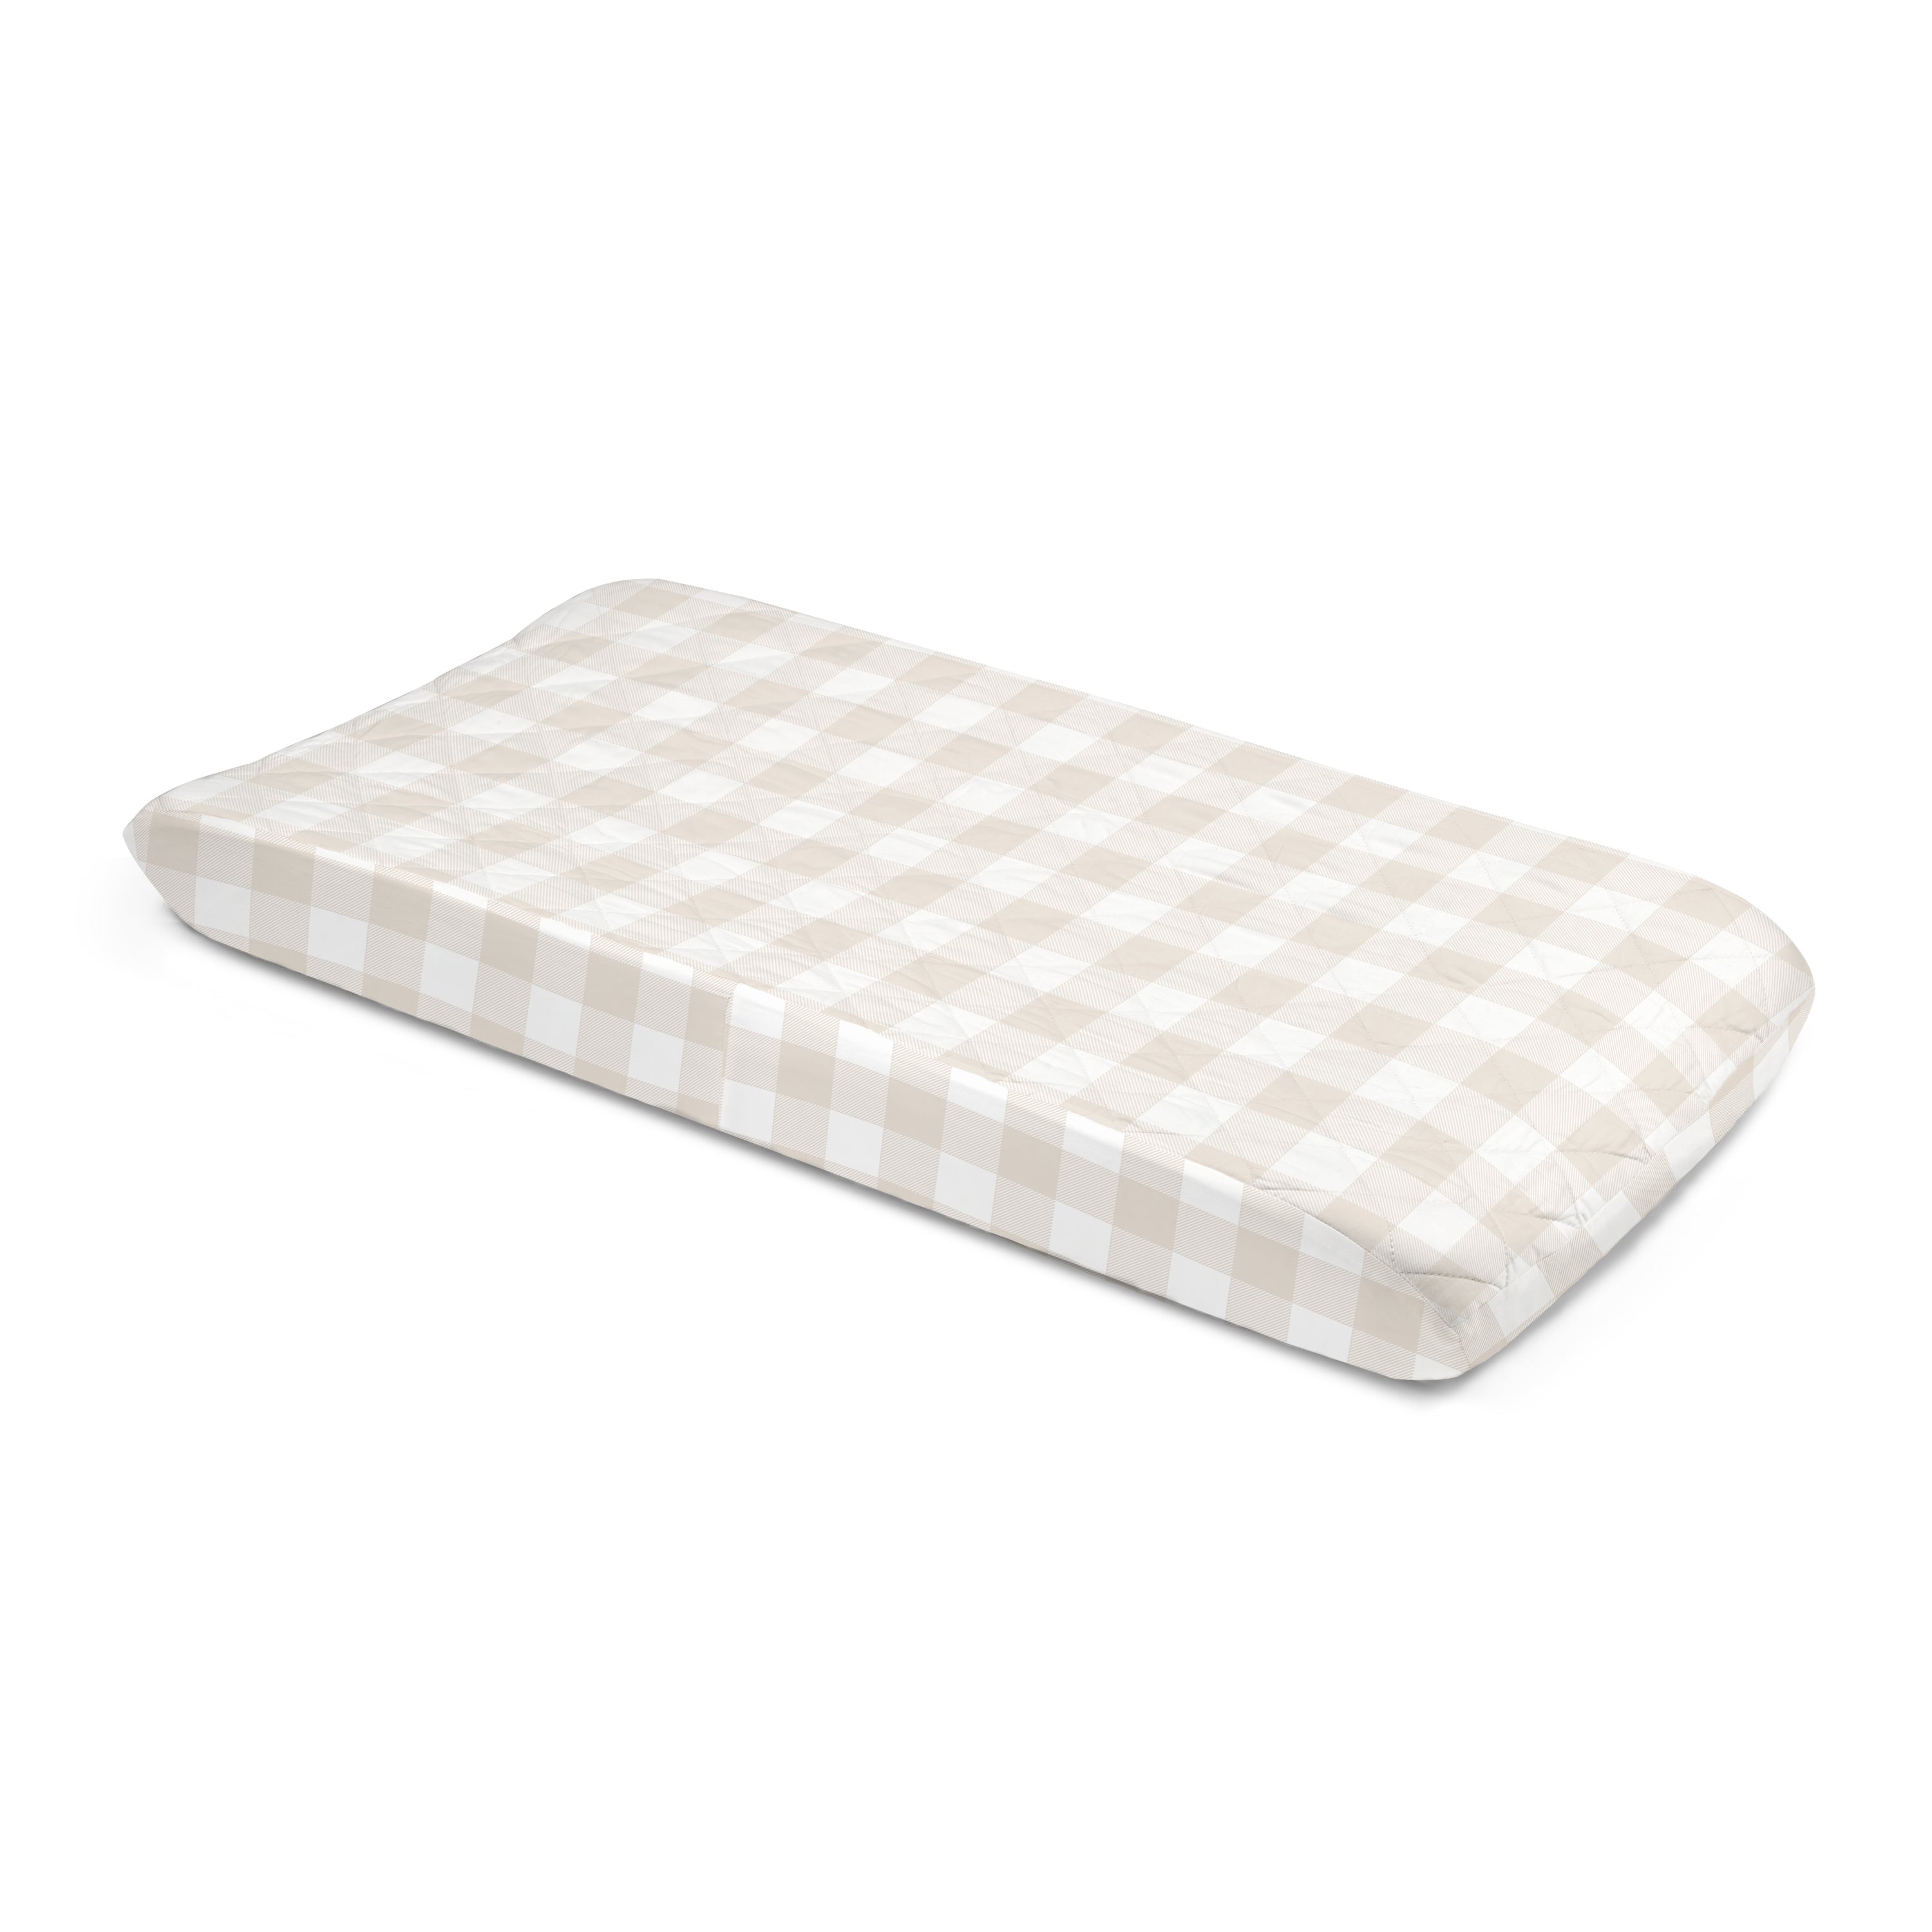 A beige and white checkered Organic Cotton Changing Pad Cover - Plaid by Makemake Organics isolated on a white background.